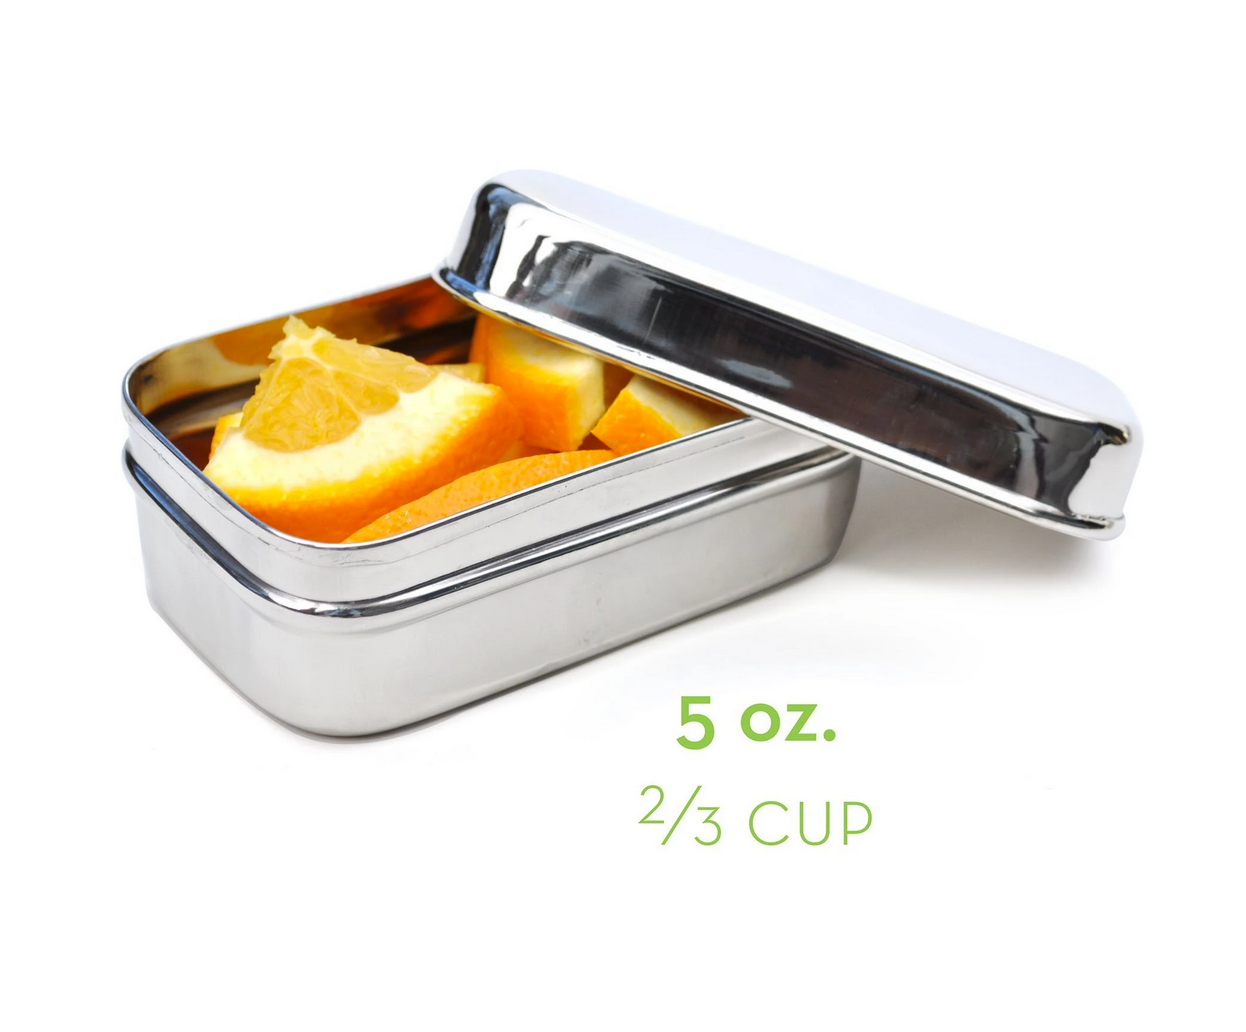 Stainless Steel Lunch Box Mini Sauce Containers, Set of 2 by ecozoi